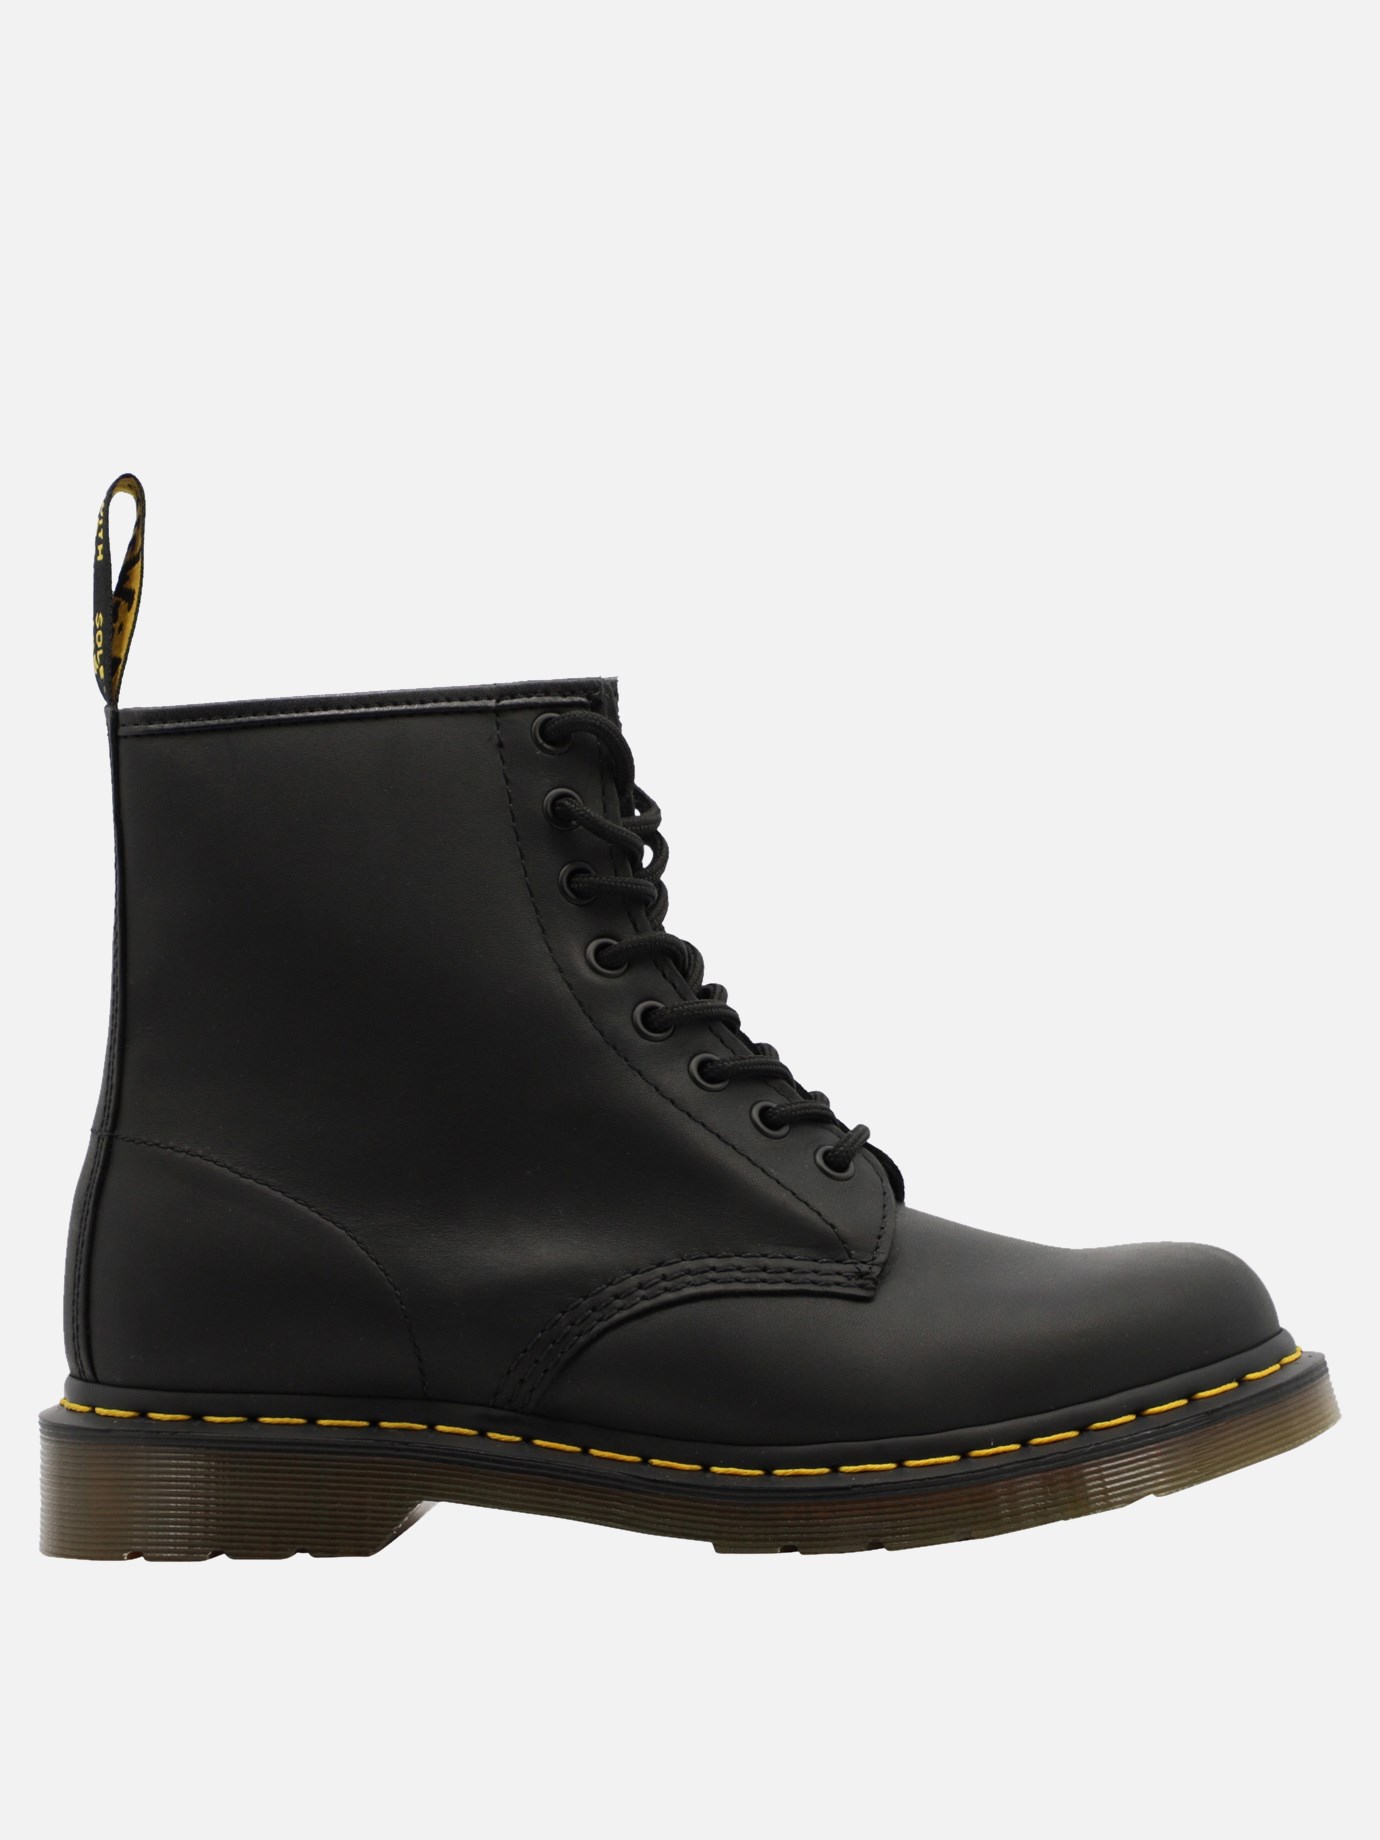  1460  military boots by Dr. Martens